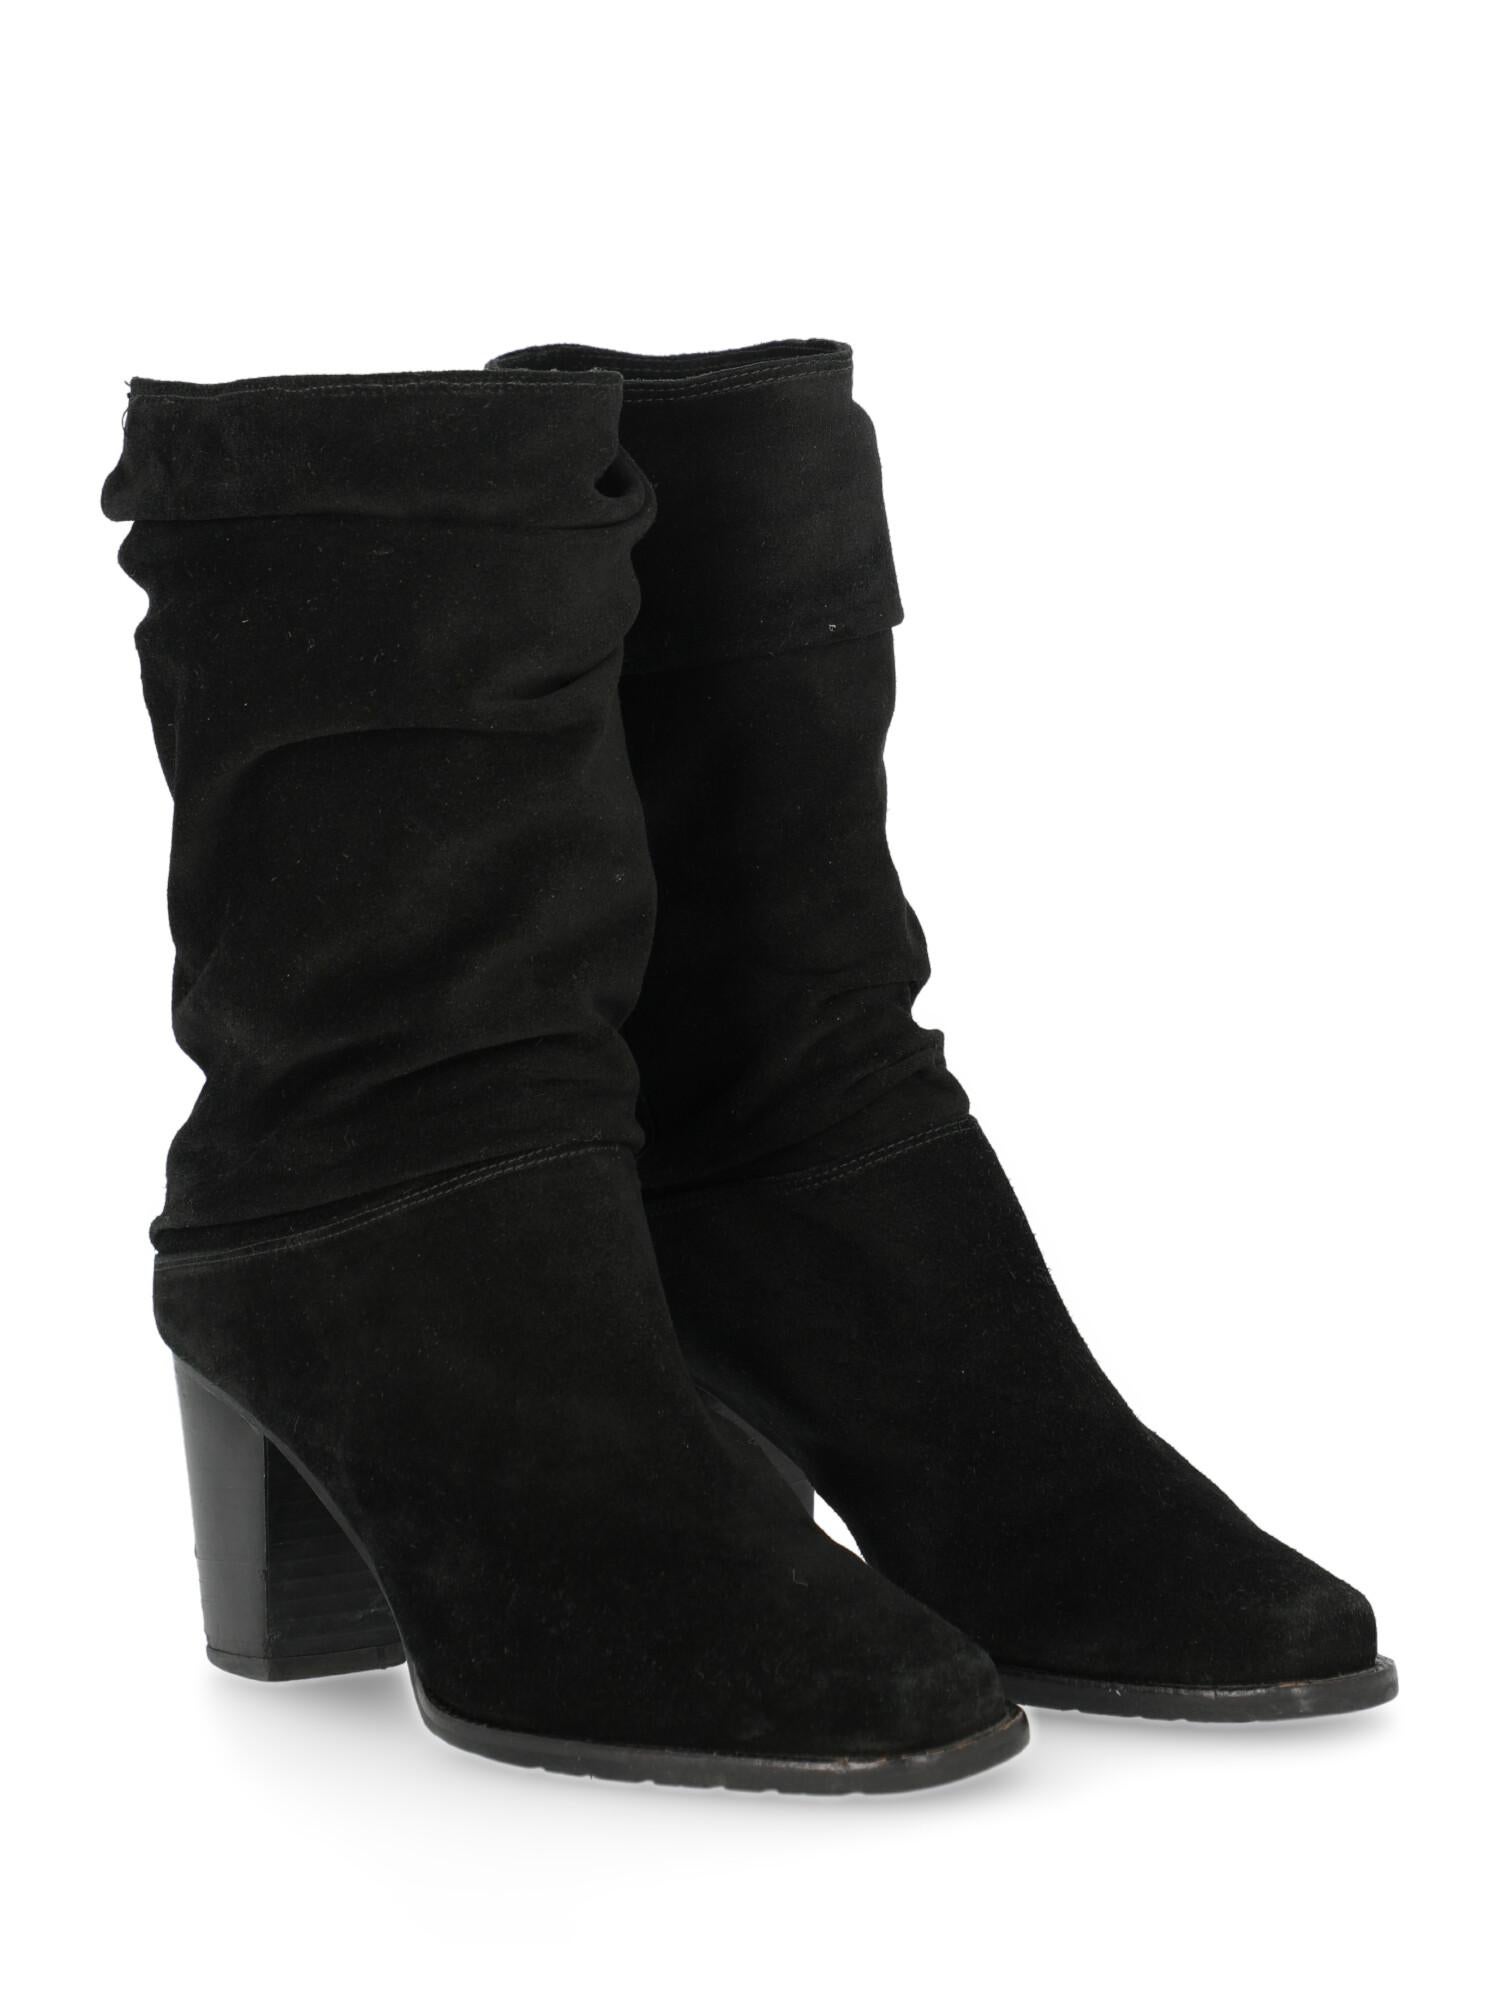 Ankle boots, leather, solid color, internal logo, suede, square toe, leather insole, non-slip sole, block heel, low and flat heel, leather lining. Product Condition: Good. Heel: visible marks. Sole: visible sign of use. Upper: slightly visible